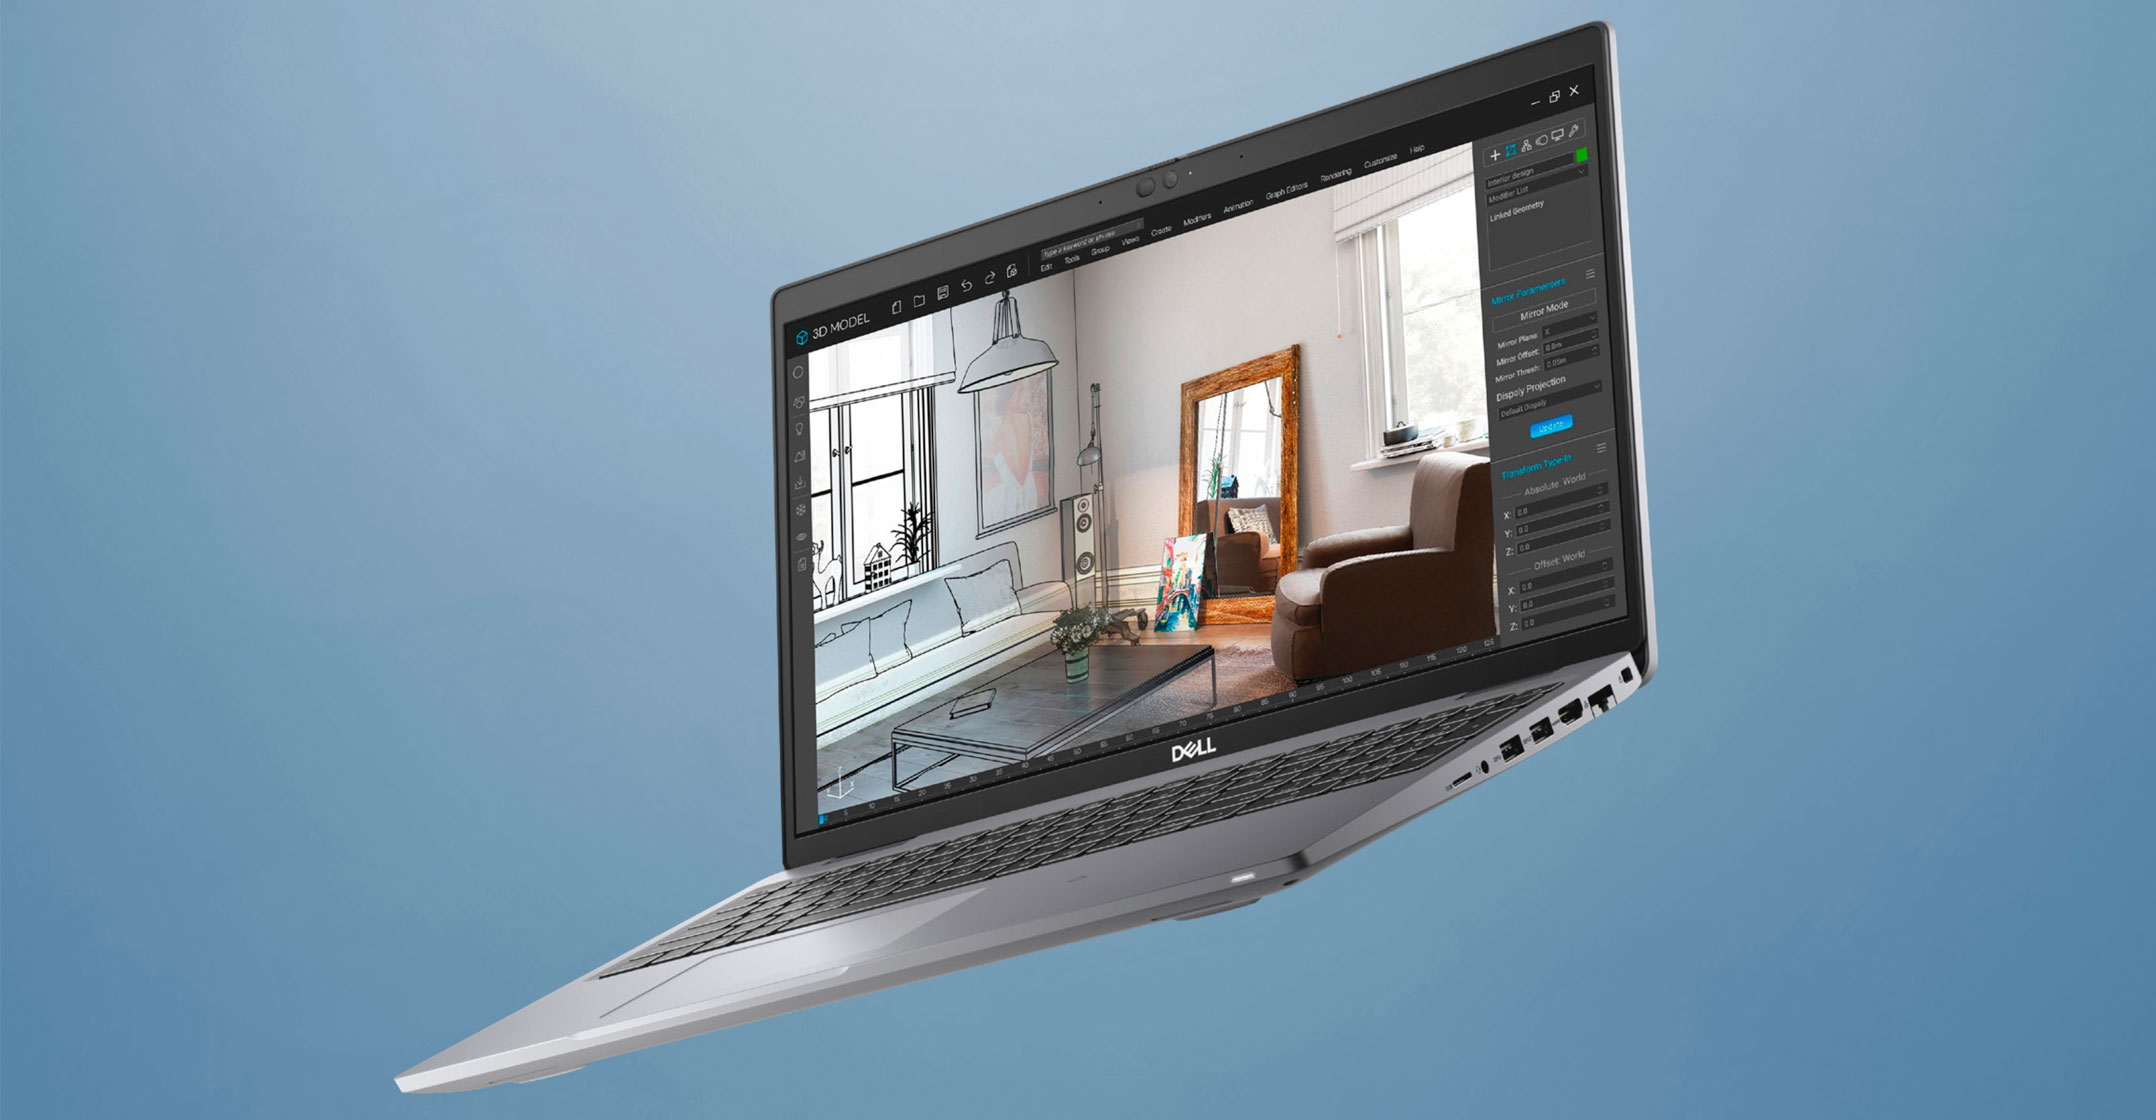 Dell Precision 3560 Mobile Workstation from Pinnacle - The power is in the  details - TechCentral